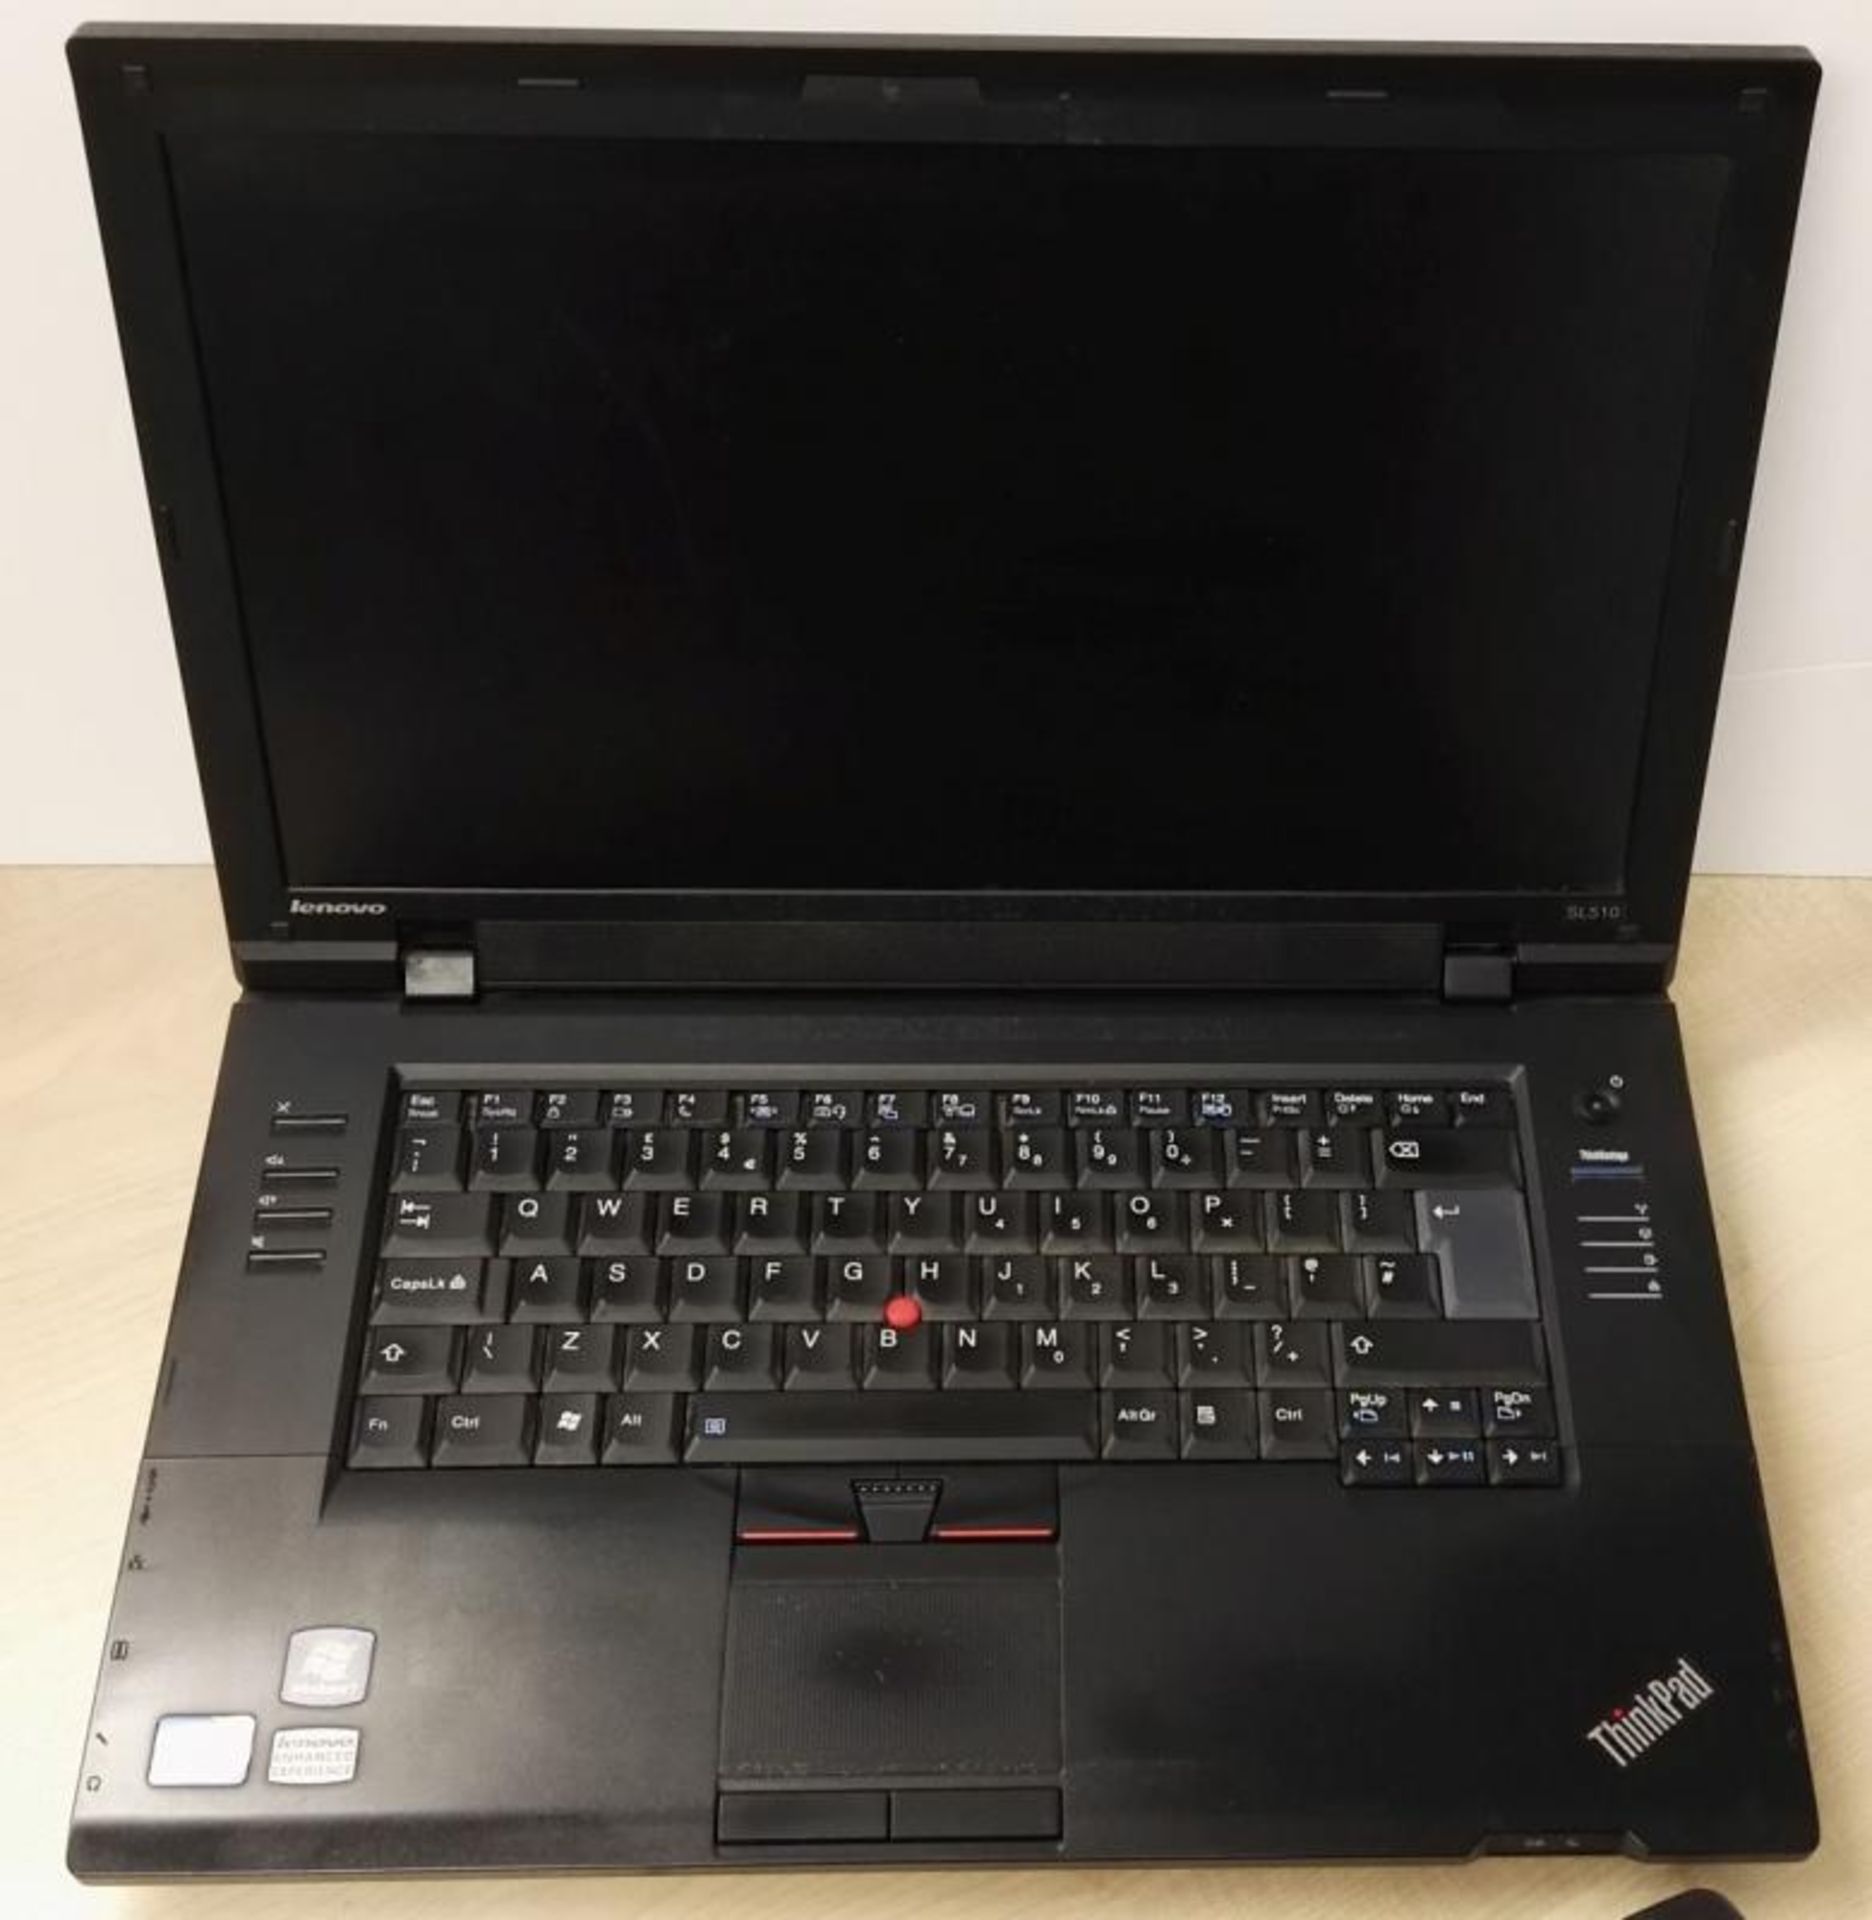 1 x Lenovo Thinkpad SL510 Laptop Computer - Features a 15.6 Inch Screen, Intel Core 2 Duo T6670 2. - Image 4 of 9